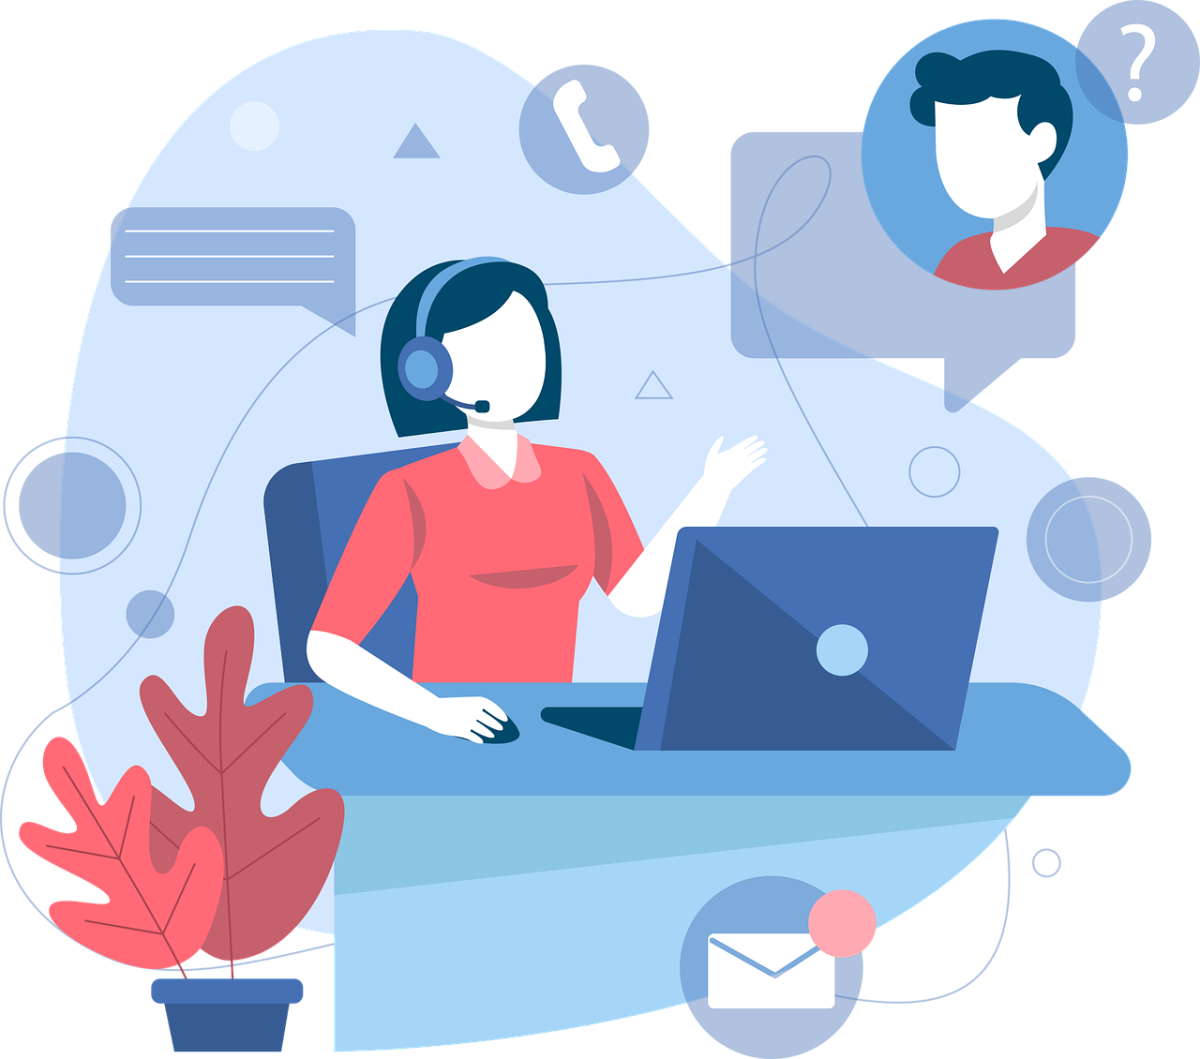 Omnichannel for Customer Service – IVR BOTs and Languages